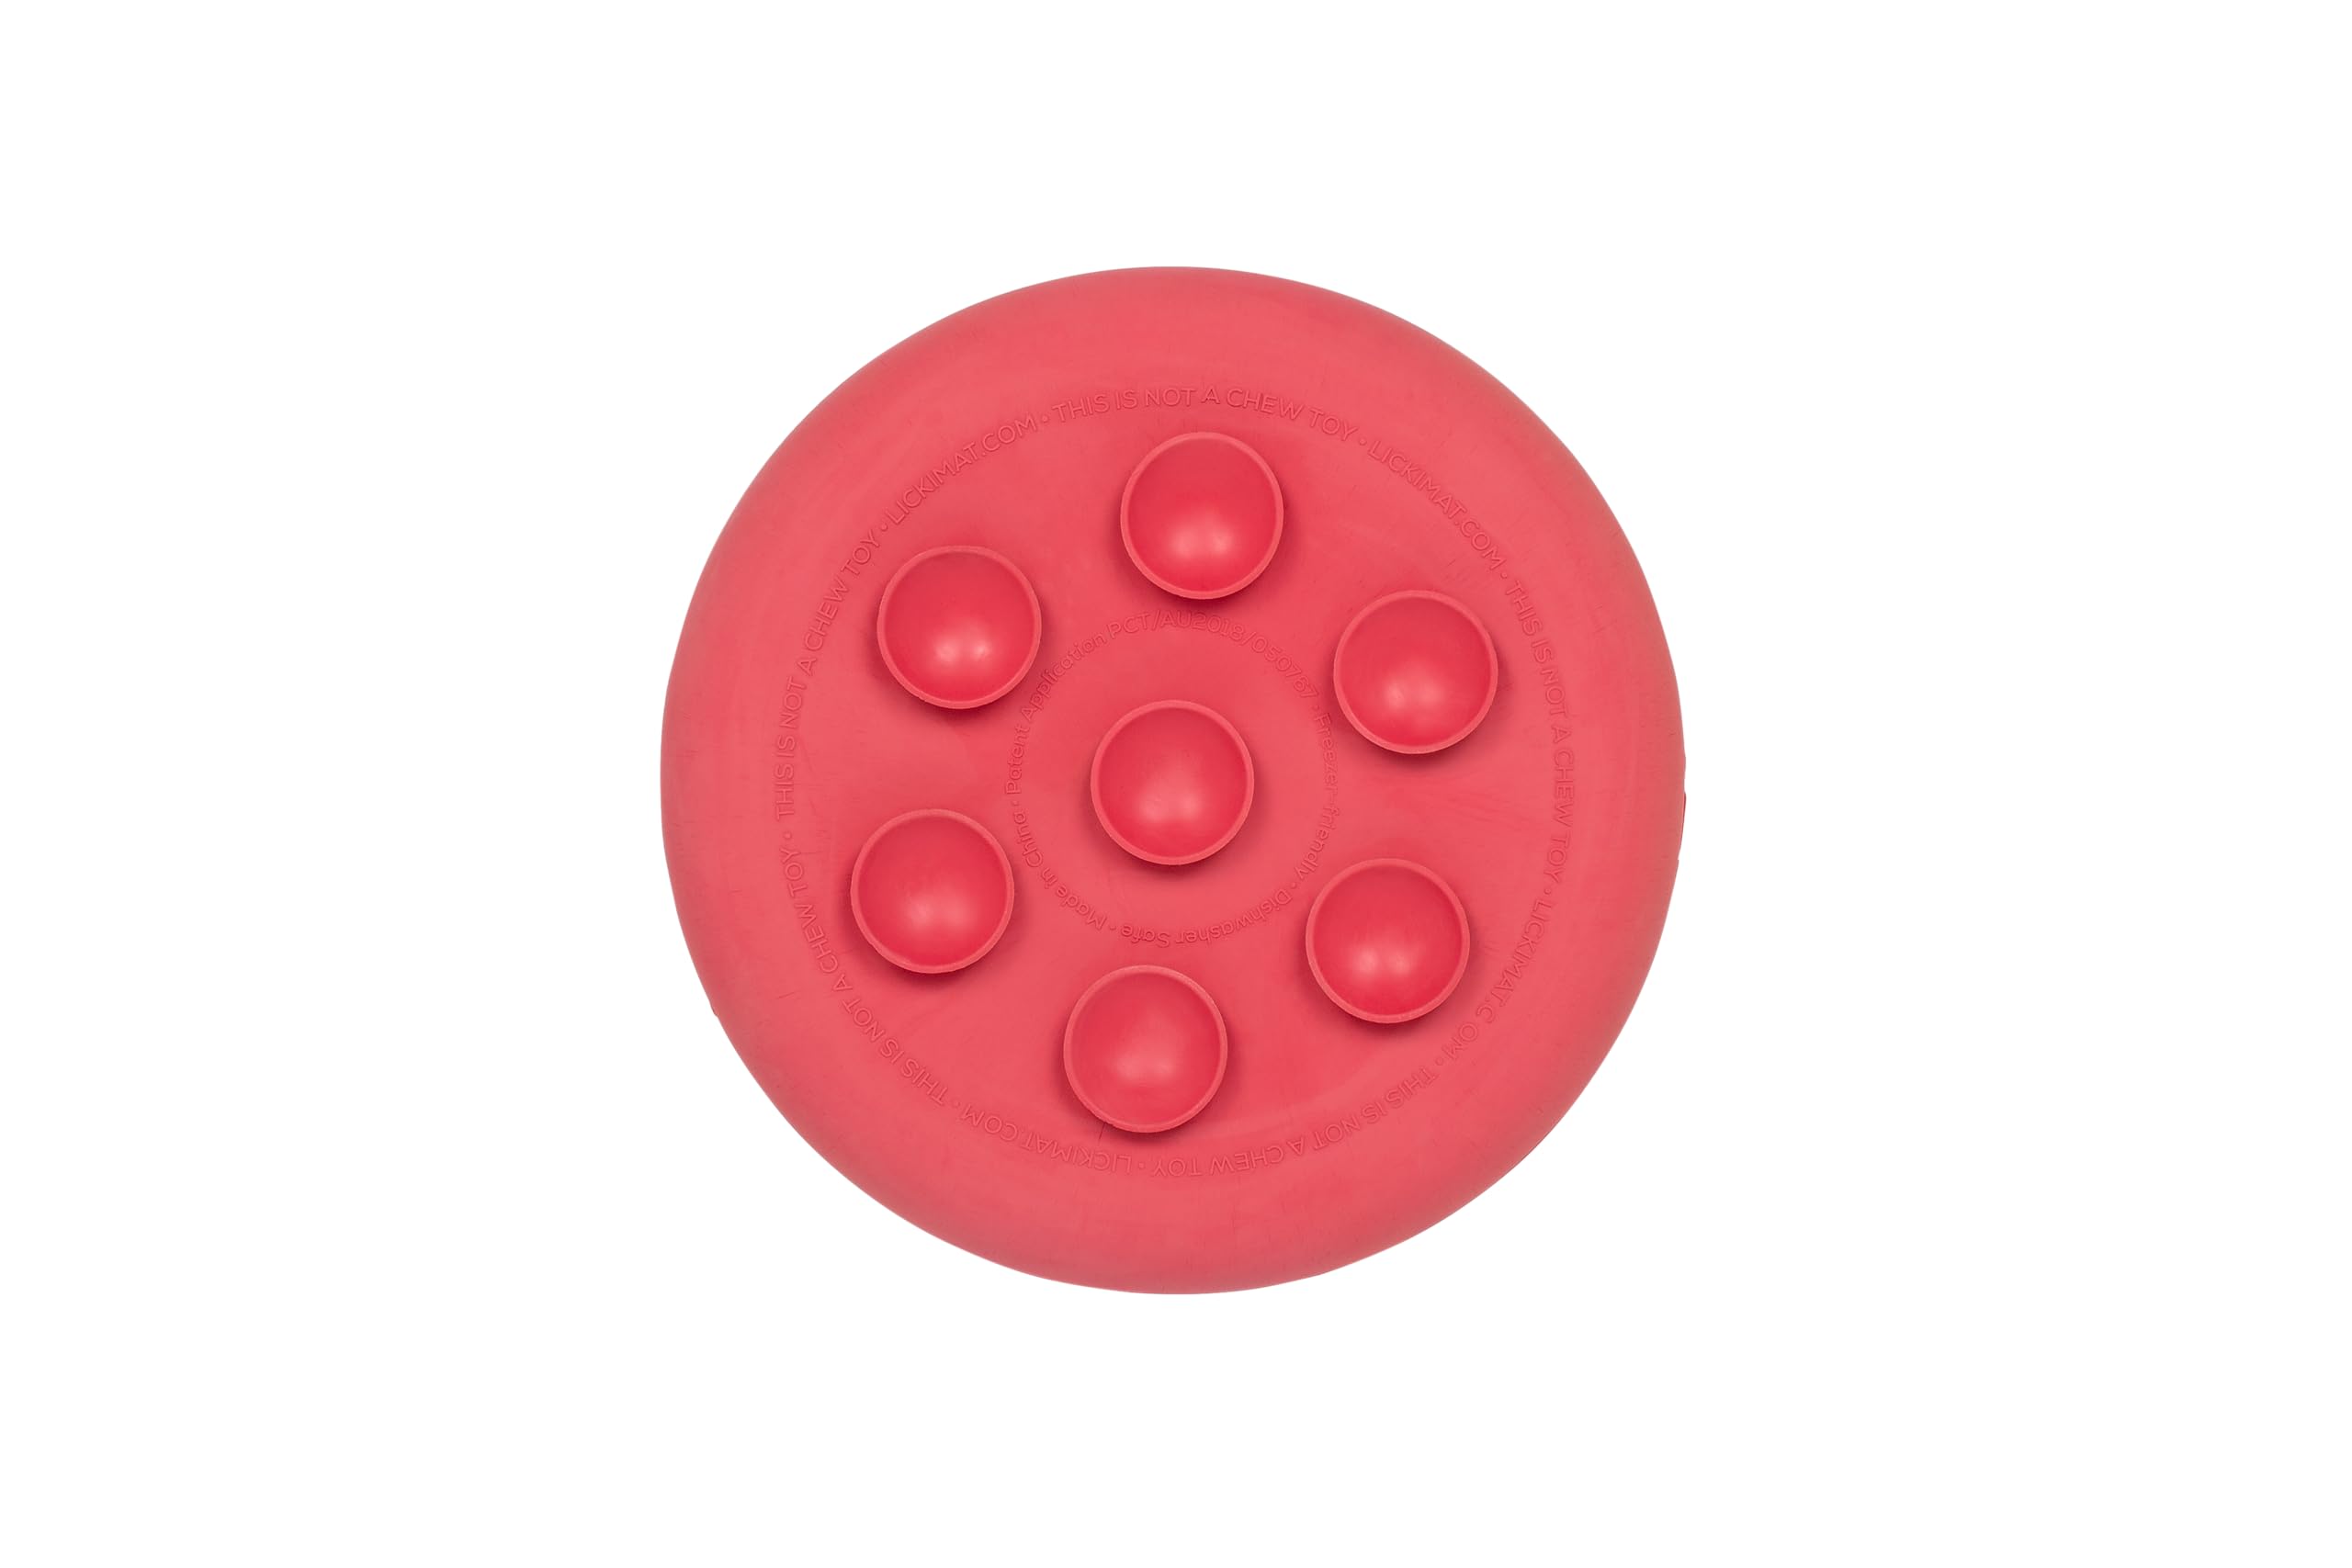 Innovative Pet Lickimat UFO Suction Grip Slow Feeding Rubber Cat and Dog Bowl - Pink  